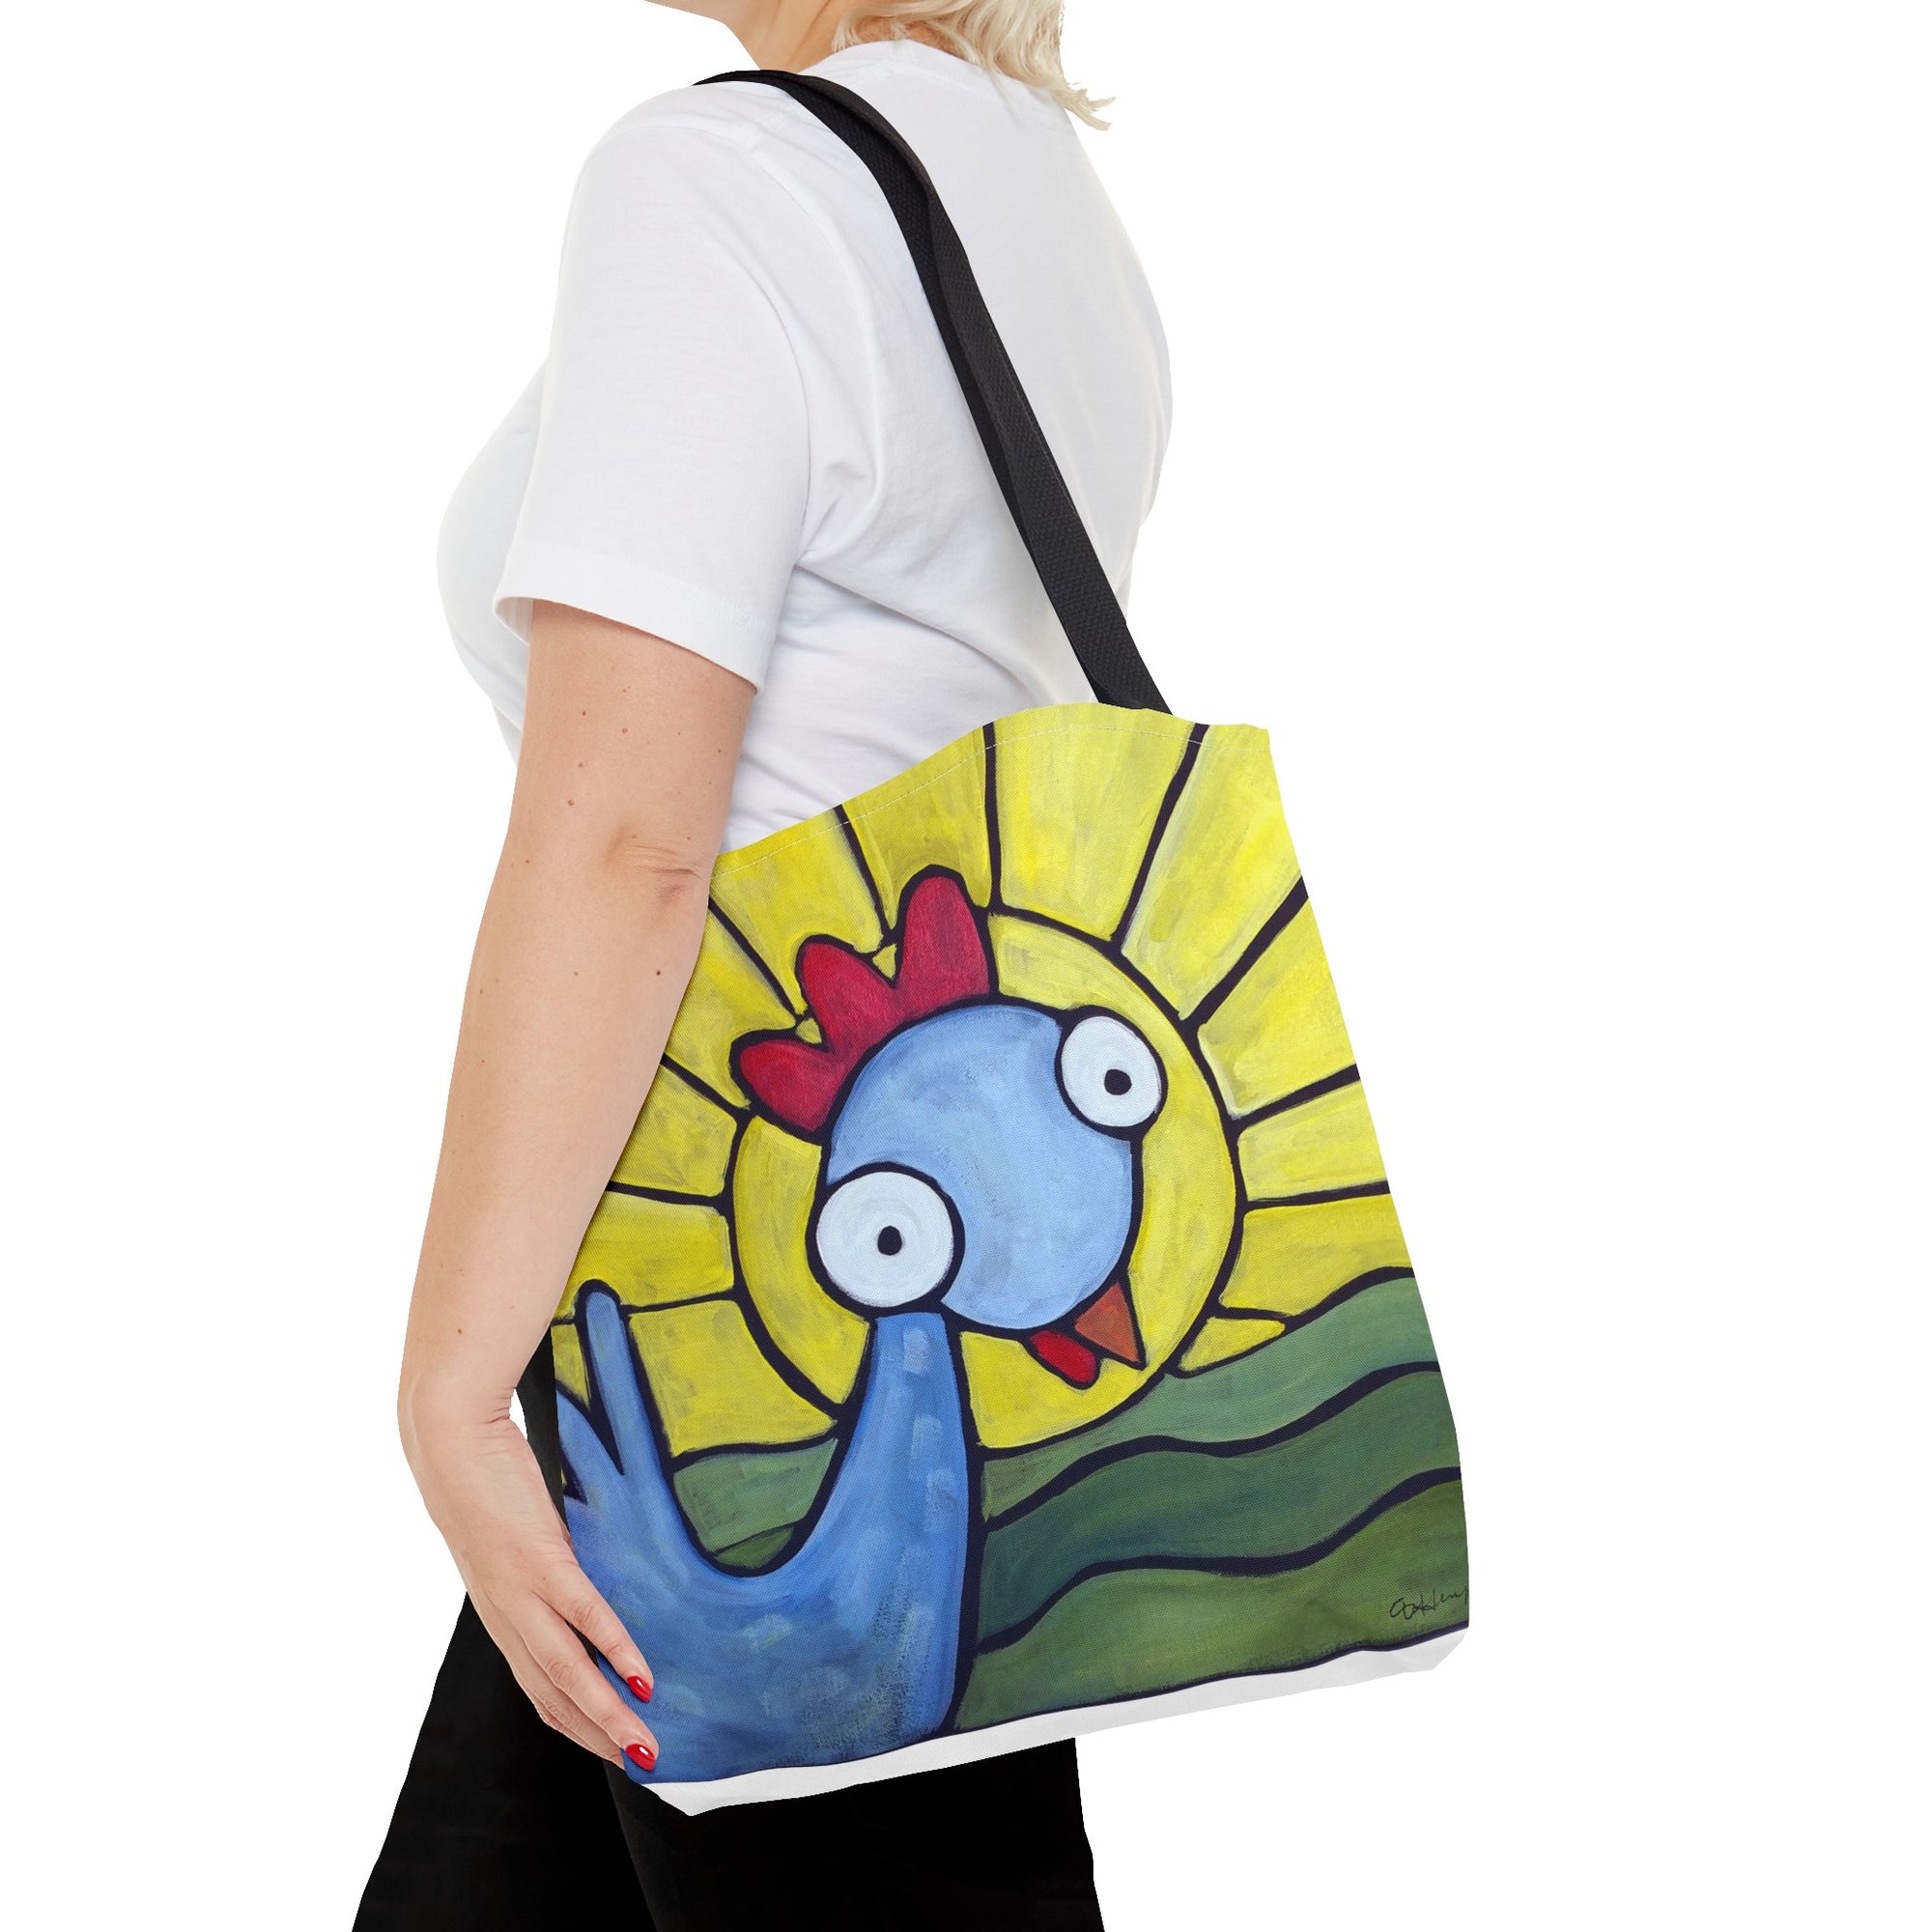 Sunshine Girl Tote Bag by Inspire Farms